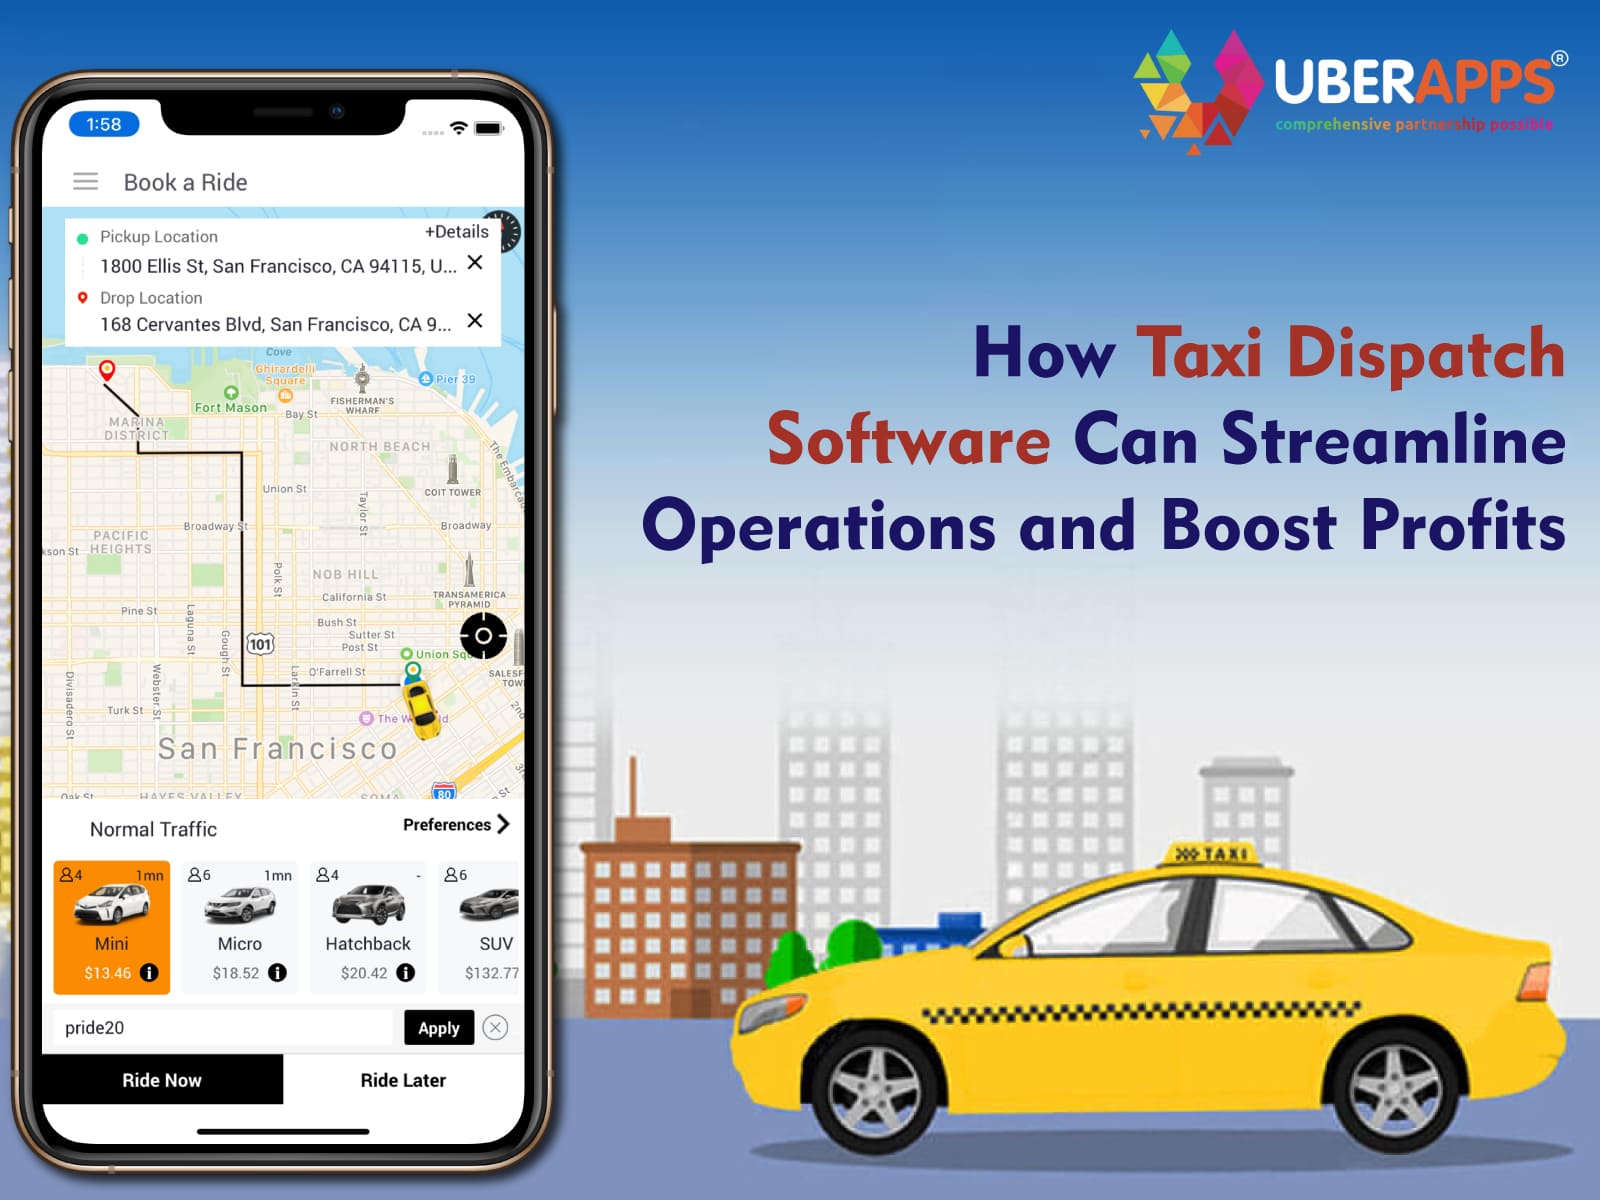 How Taxi Dispatch Software Can Streamline Operations and Boost Profits